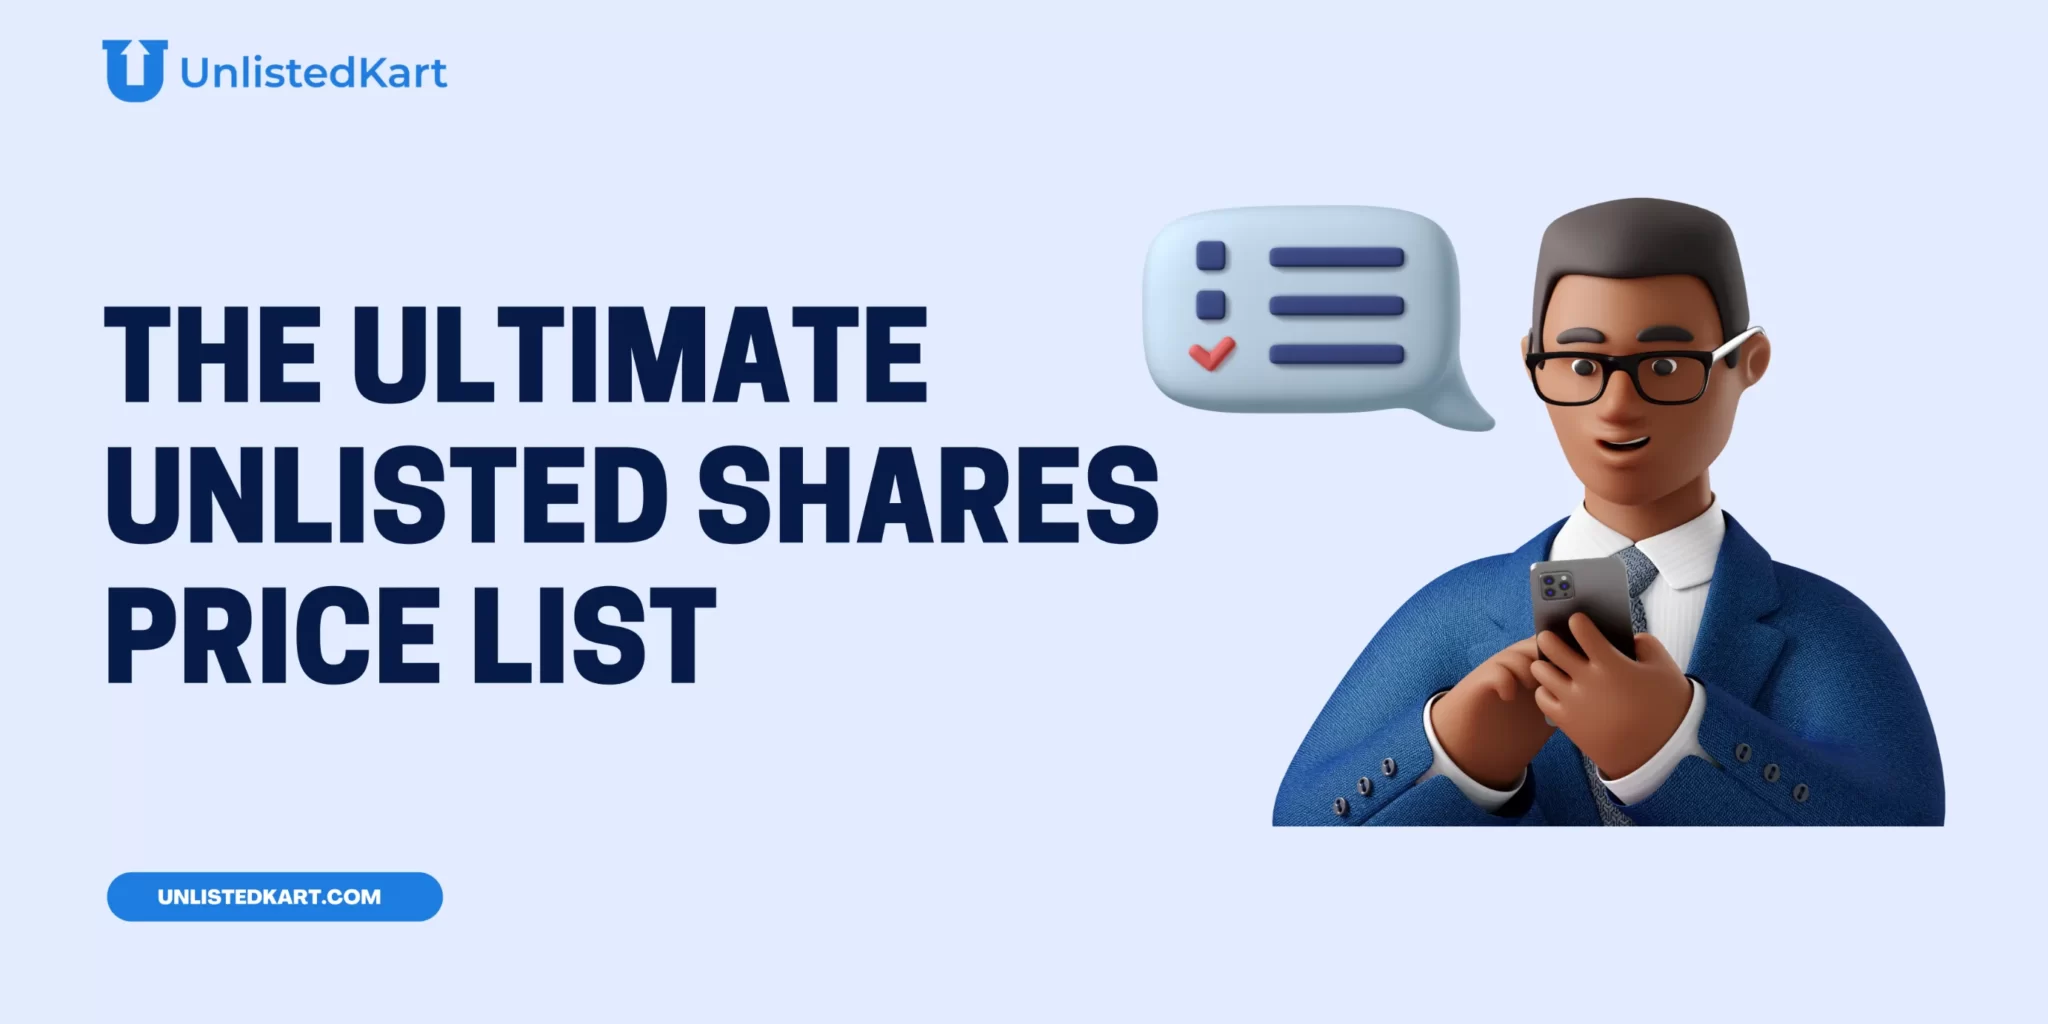 The Ultimate Unlisted Shares Price List